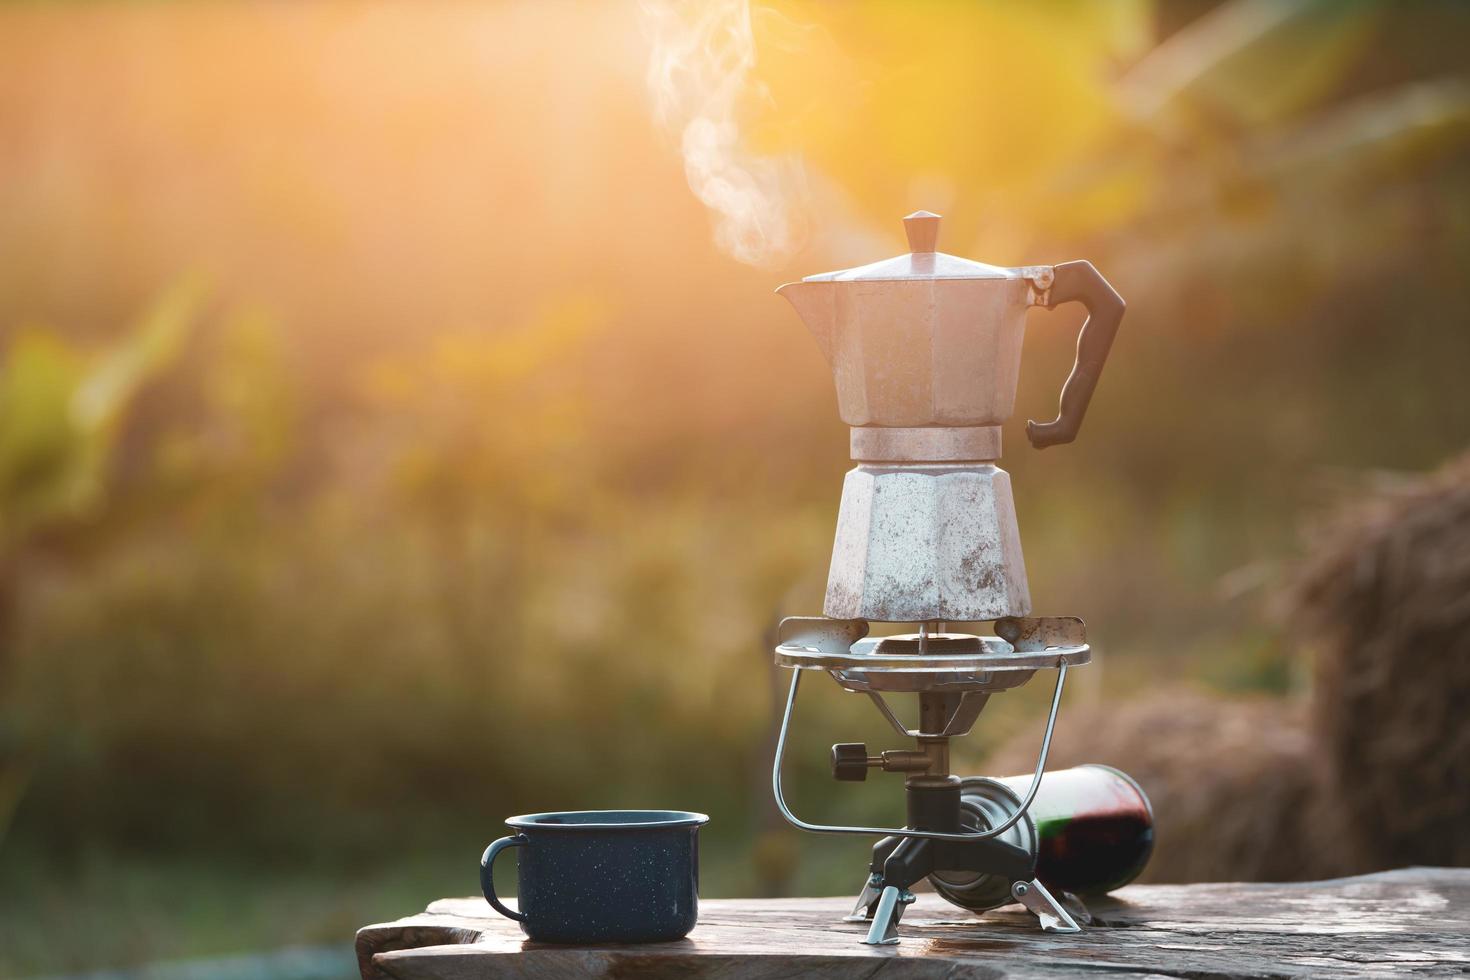 antique coffee pot On the gas stove for camping when the sun rises in the morning.soft focus. photo